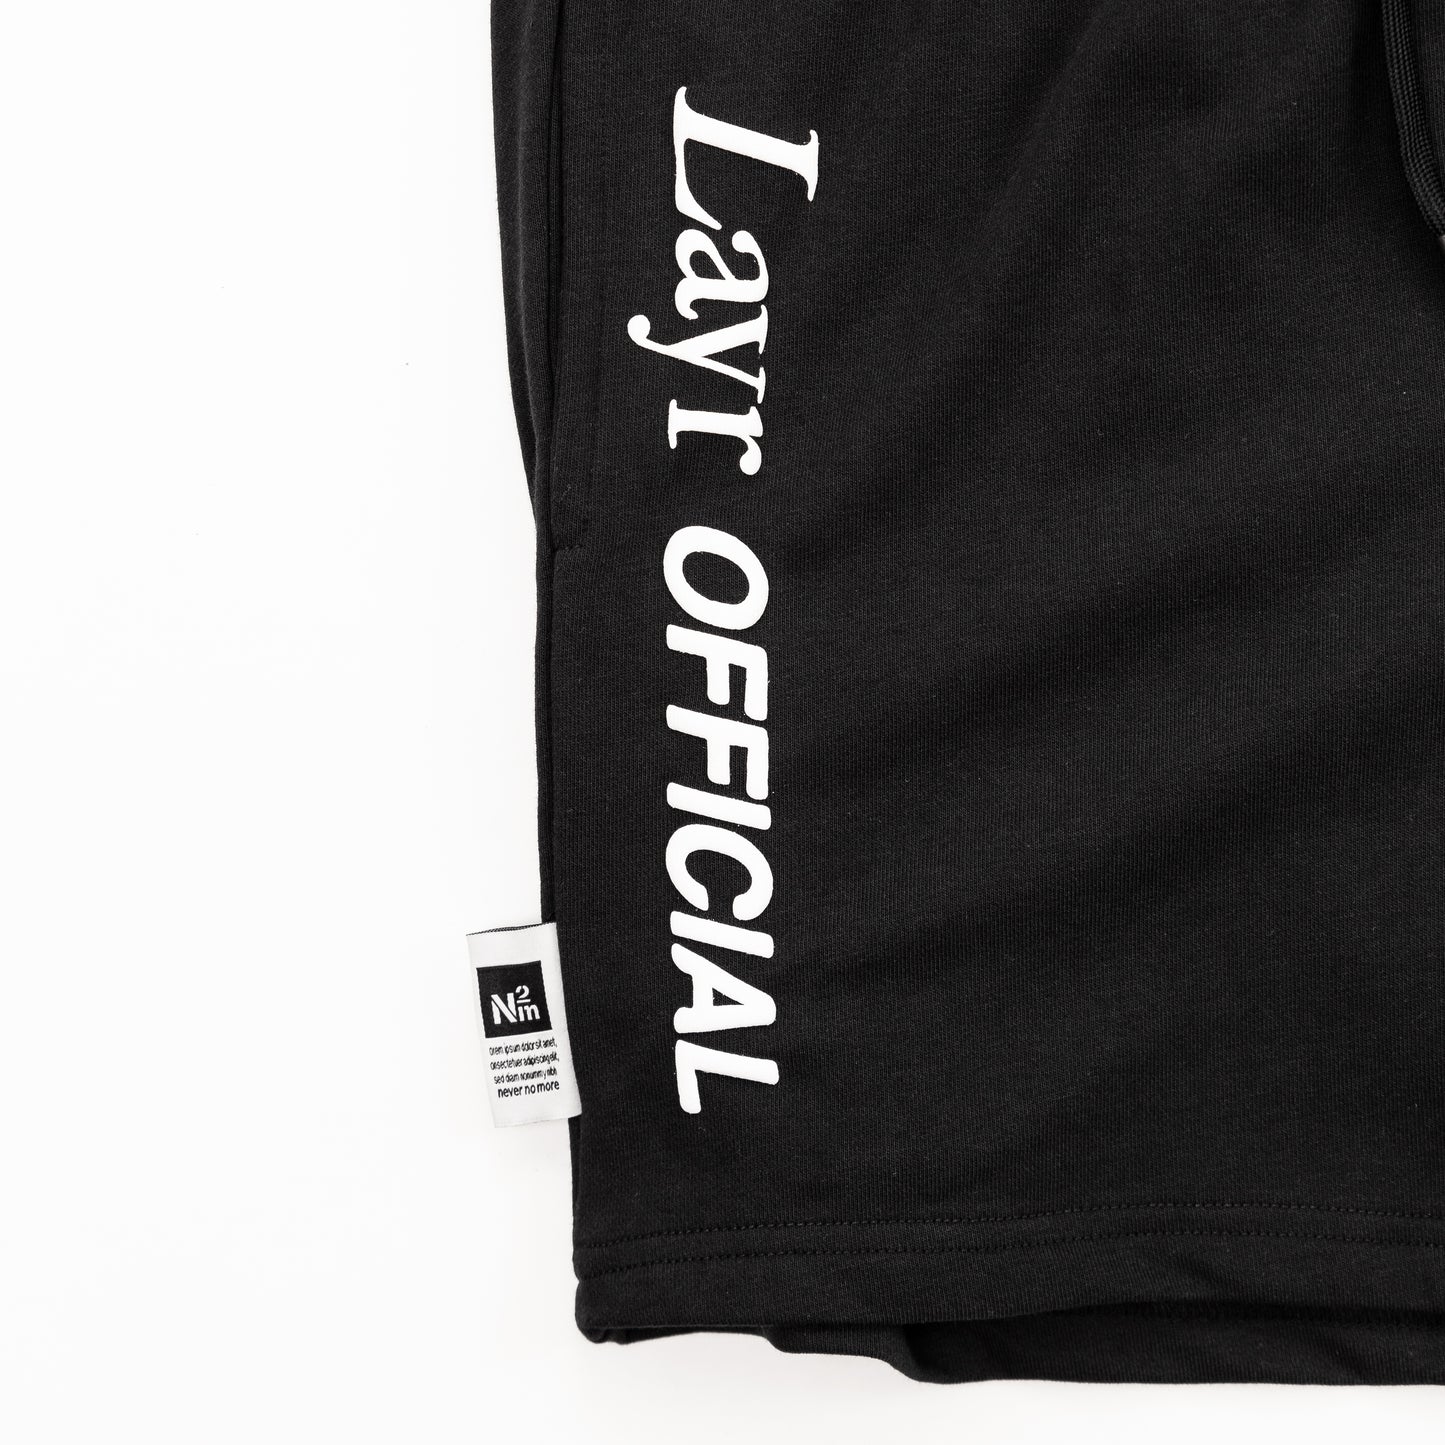 Light-Weight LO Short, Black/White - Layr Official